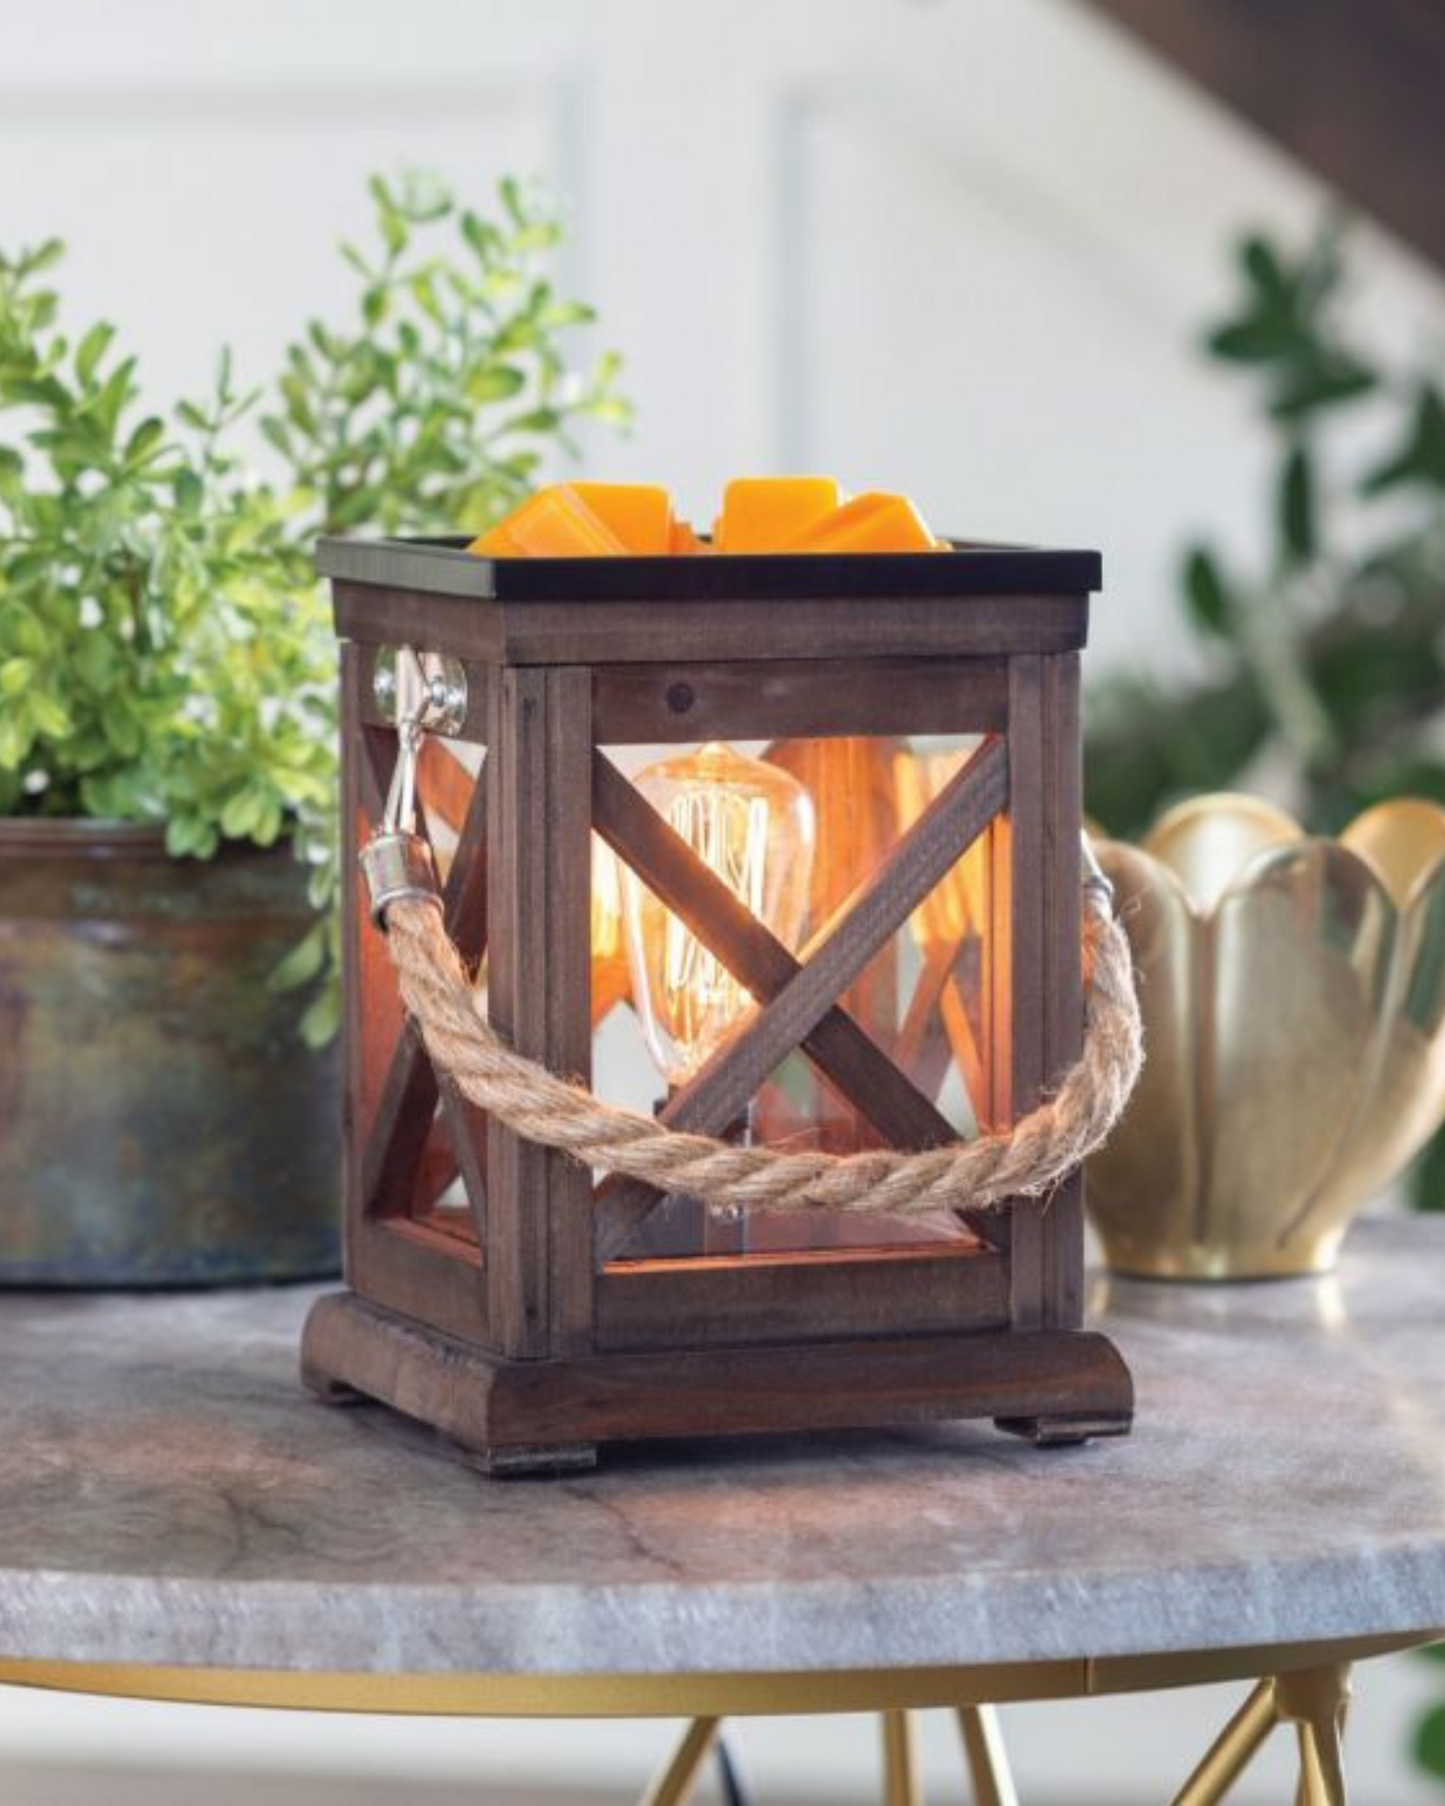 A classic lantern made from espresso toned wood and accented with a rustic rope handle. The traditional x-pattern tops off a slightly coastal feel. Illumination Fragrance Warmers use a halogen bulb to warm wax melts in the dish, releasing their fragrance. Suggested Use: Simply add wax melts to the dish, turn it on, and enjoy your favorite fragrance as it spreads through the room. This warmer works beautifully with 100% Soy Wax Melts by Farmhouse Charm Candles Inc.